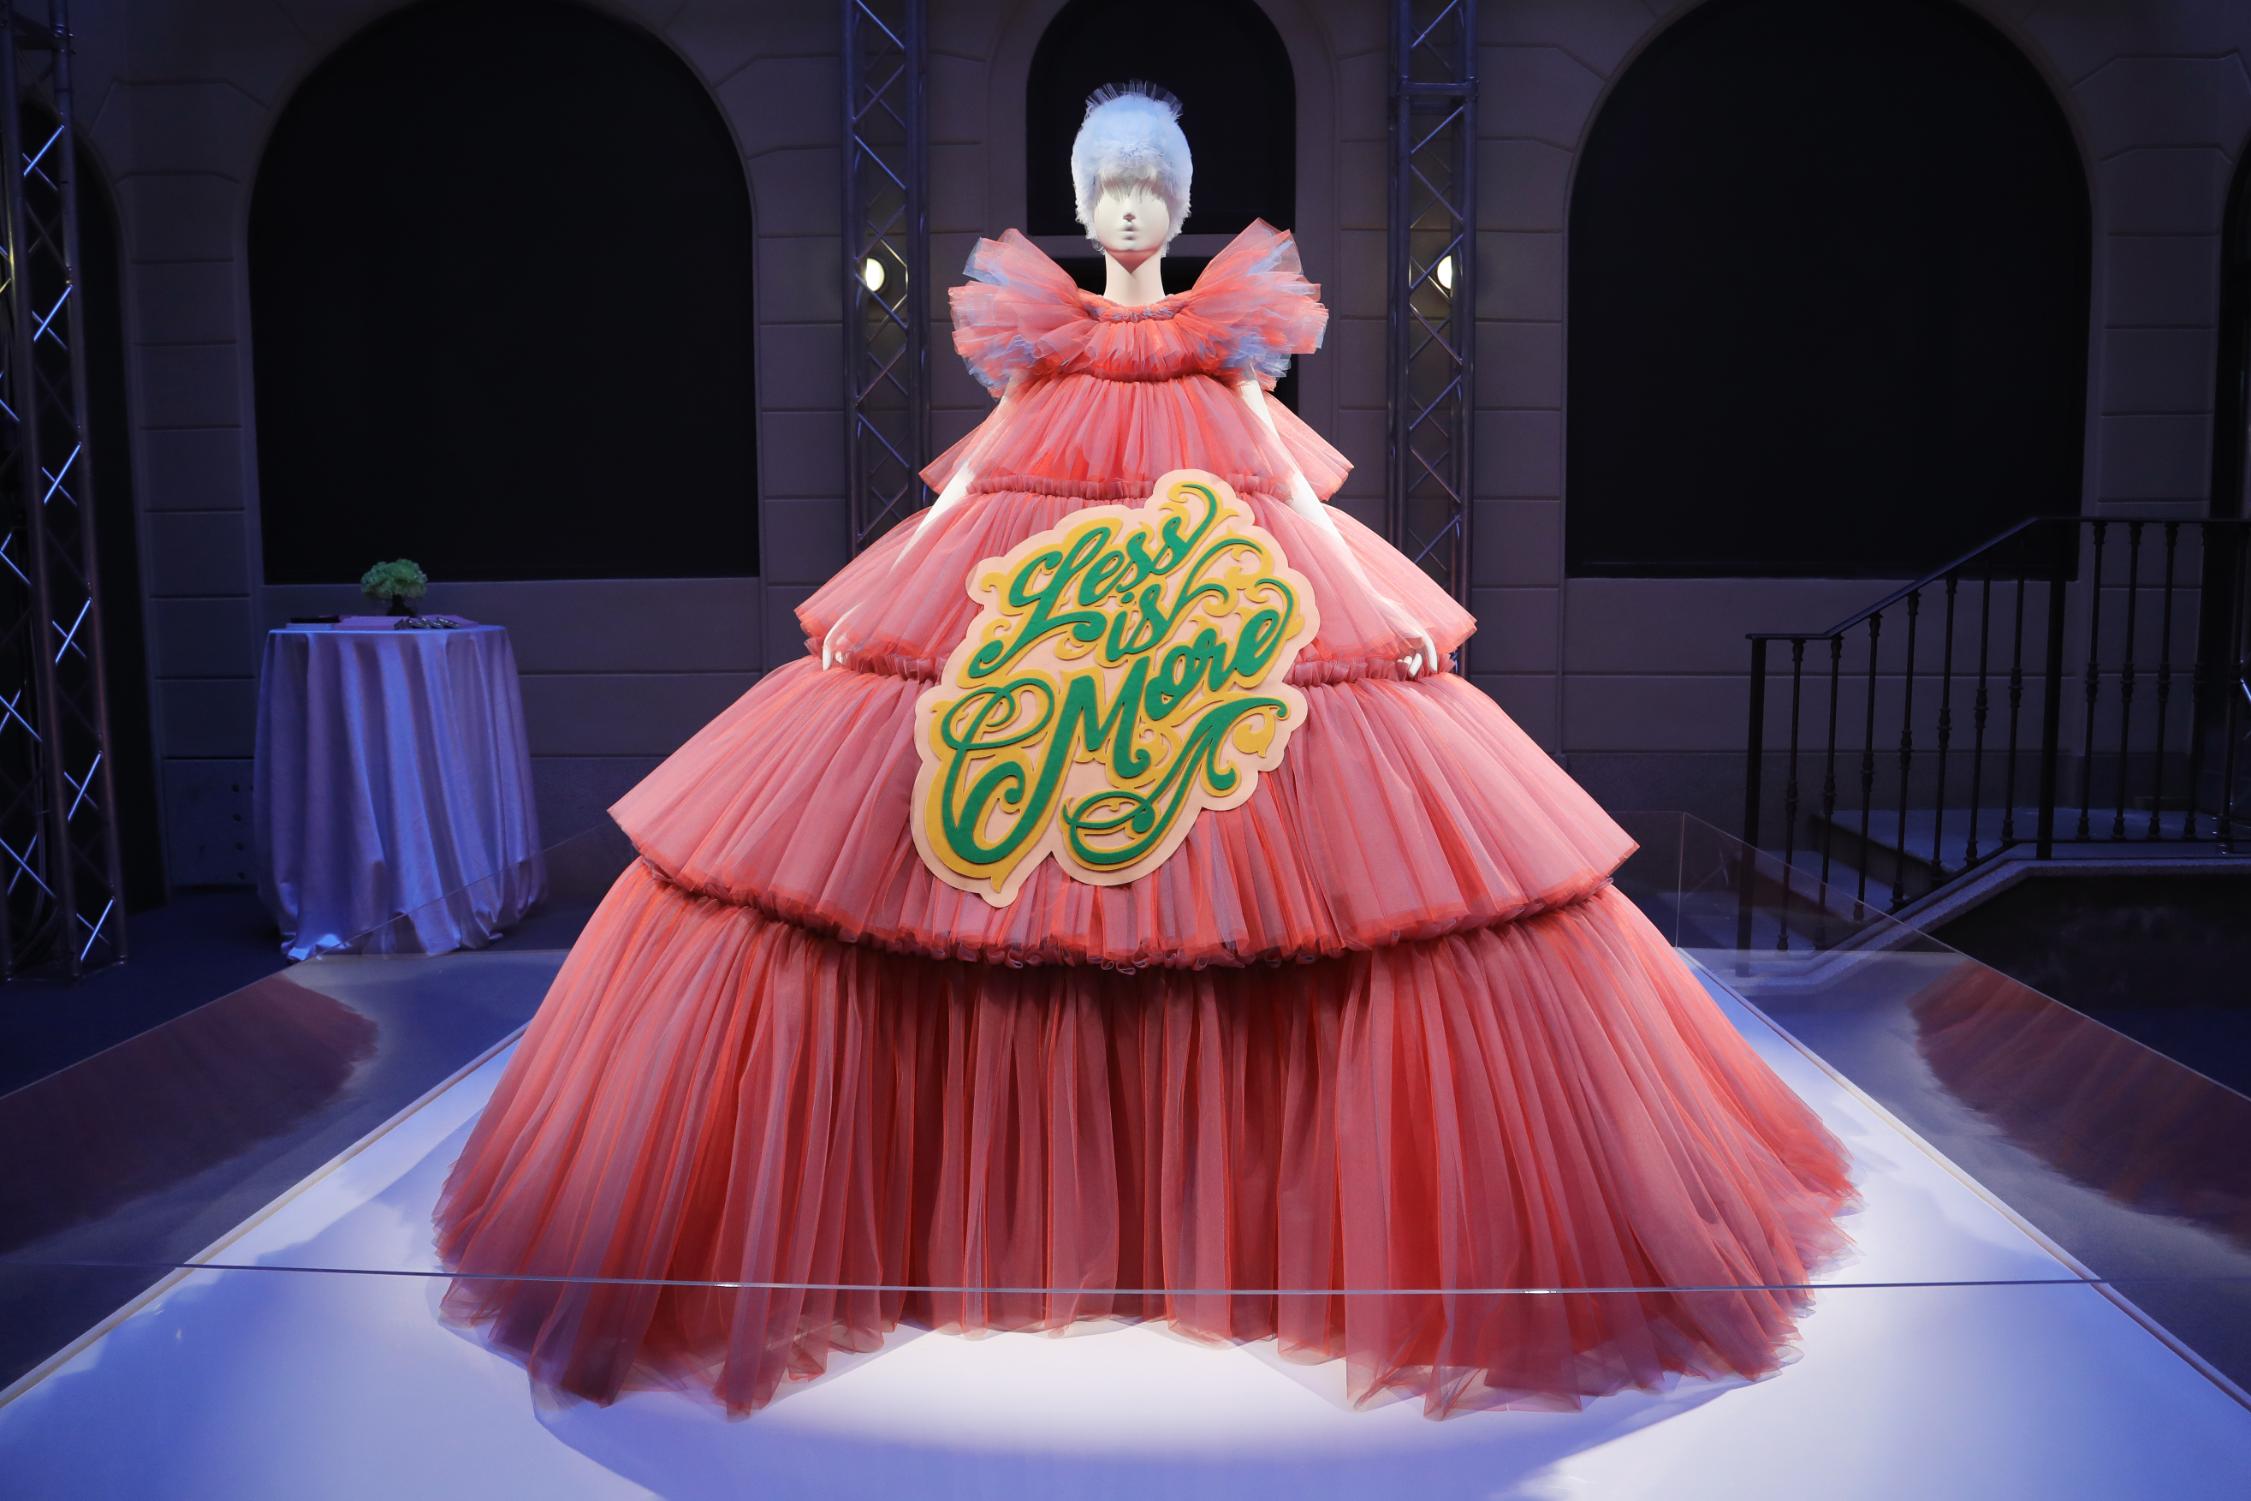 Camp' fashion history explored at Met exhibition - CNN Style